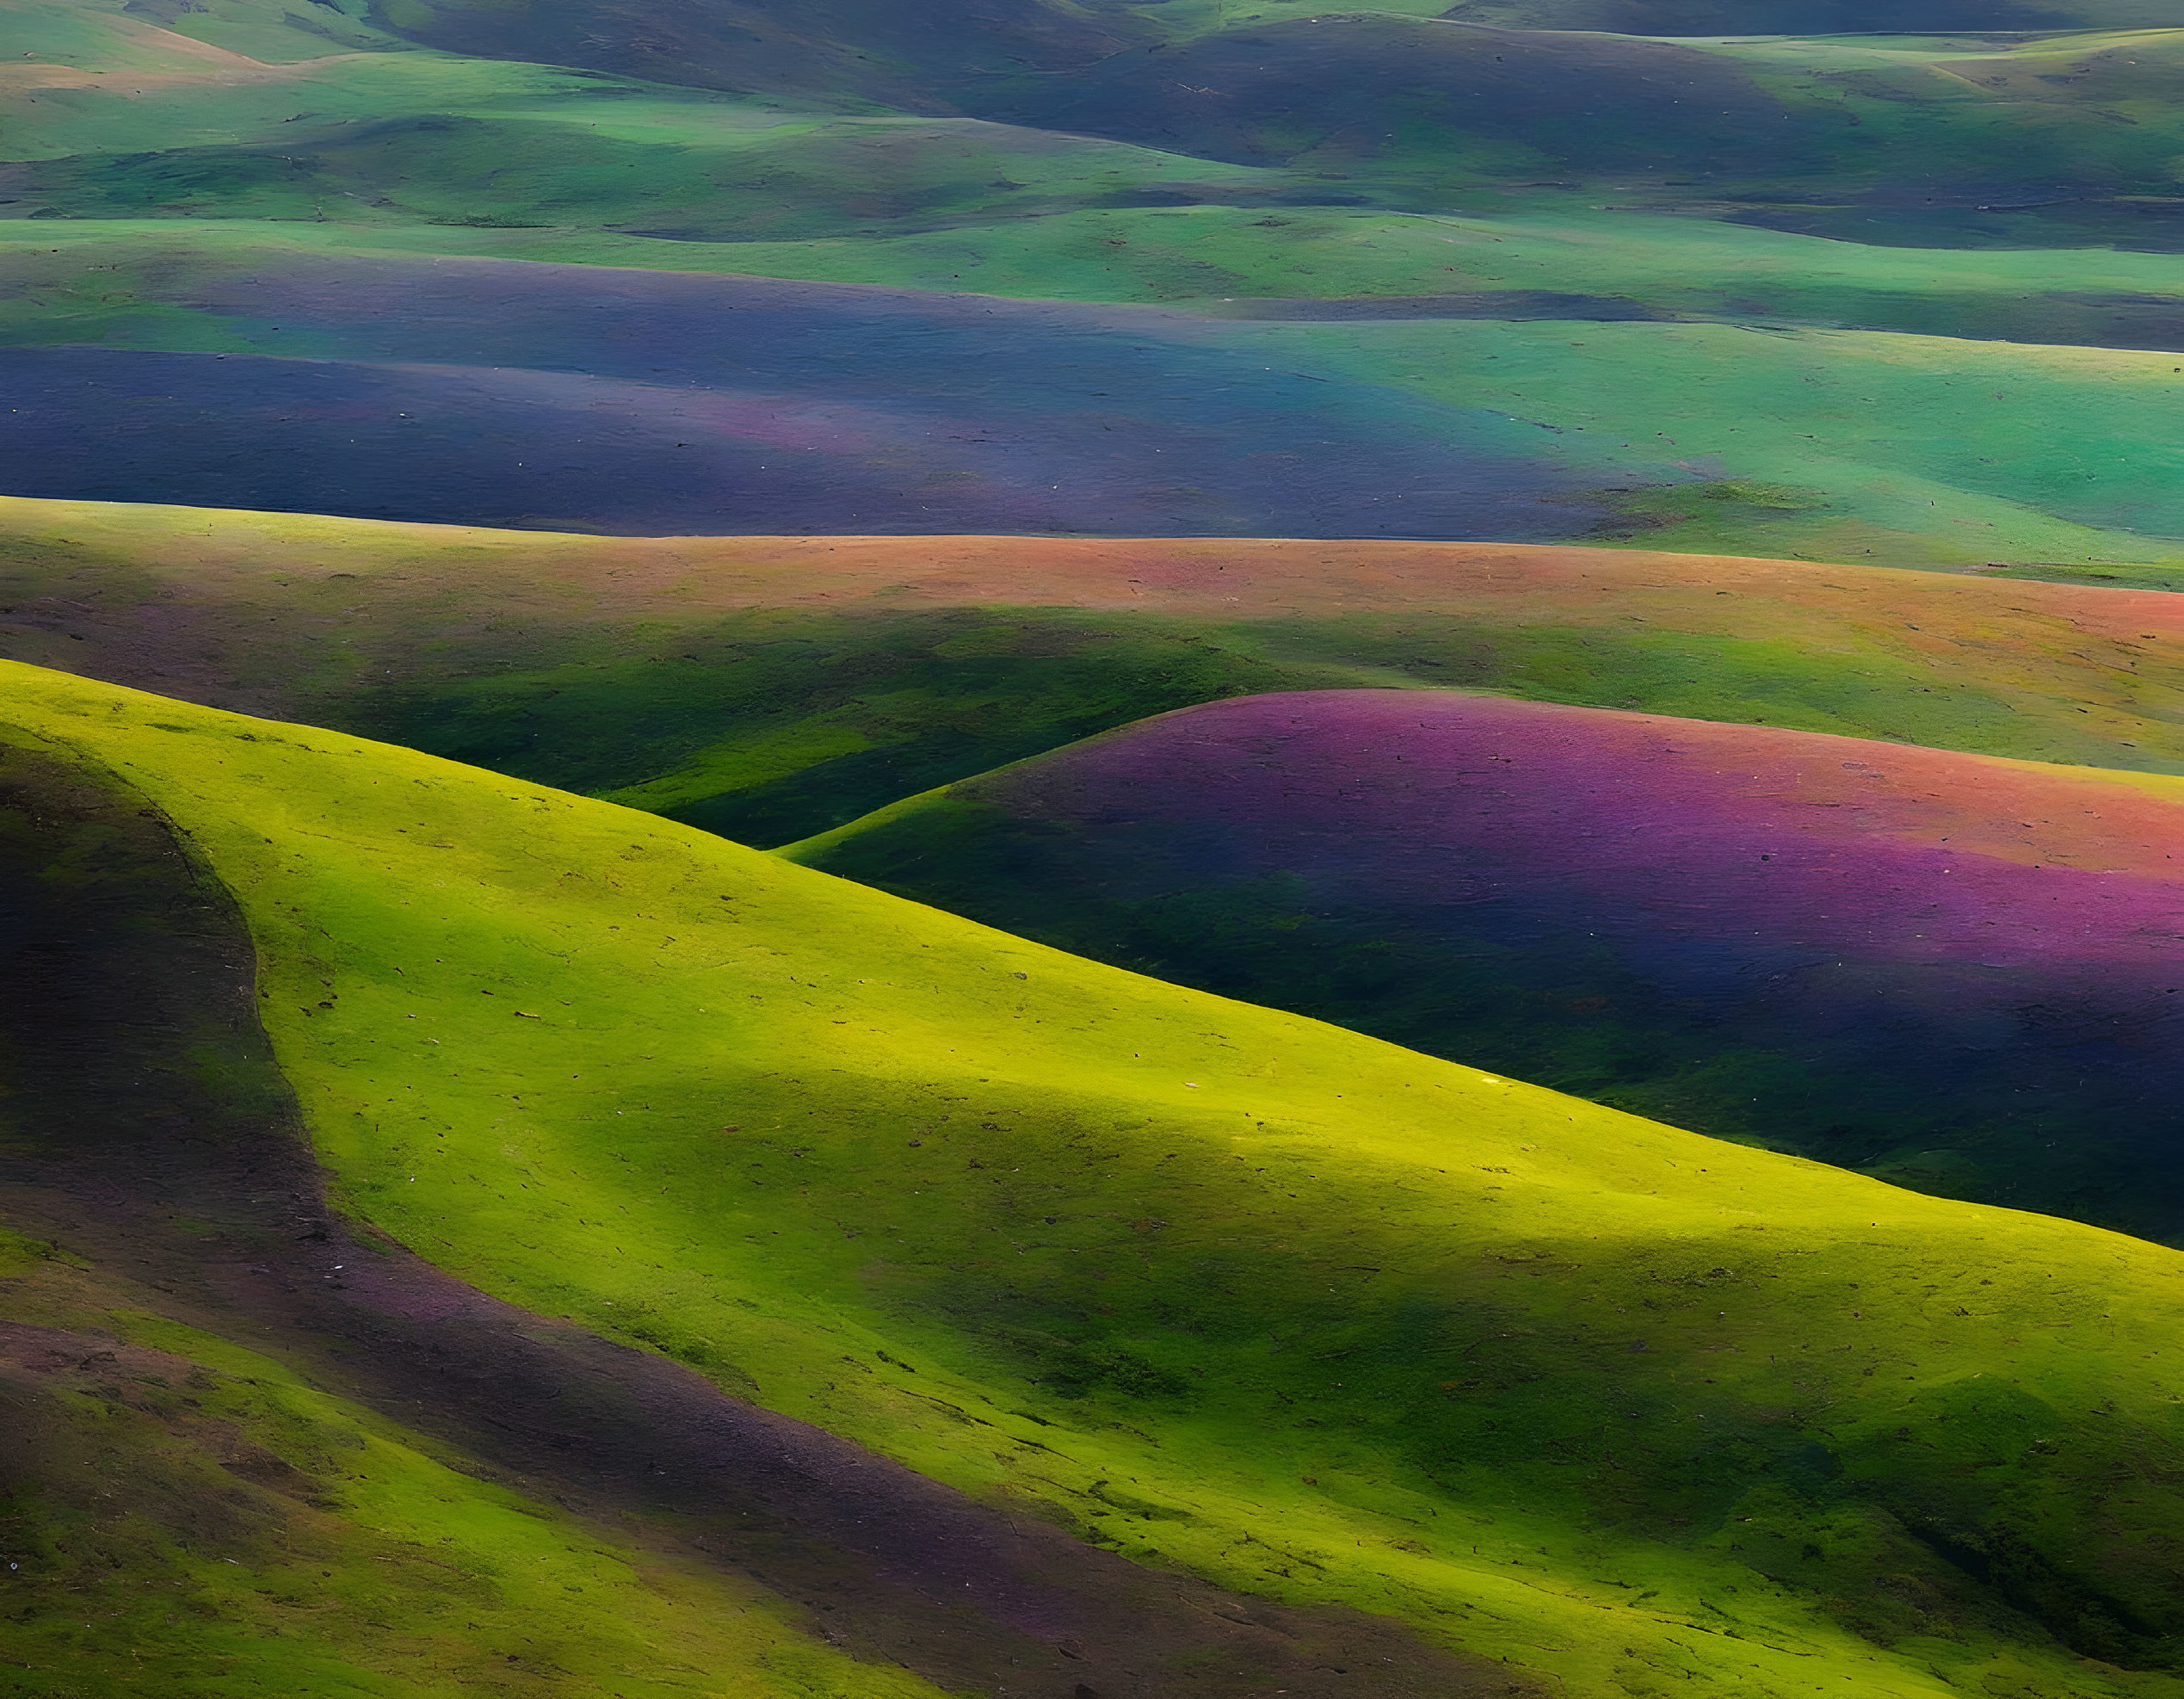 Vibrant purple and green rolling hills landscape view